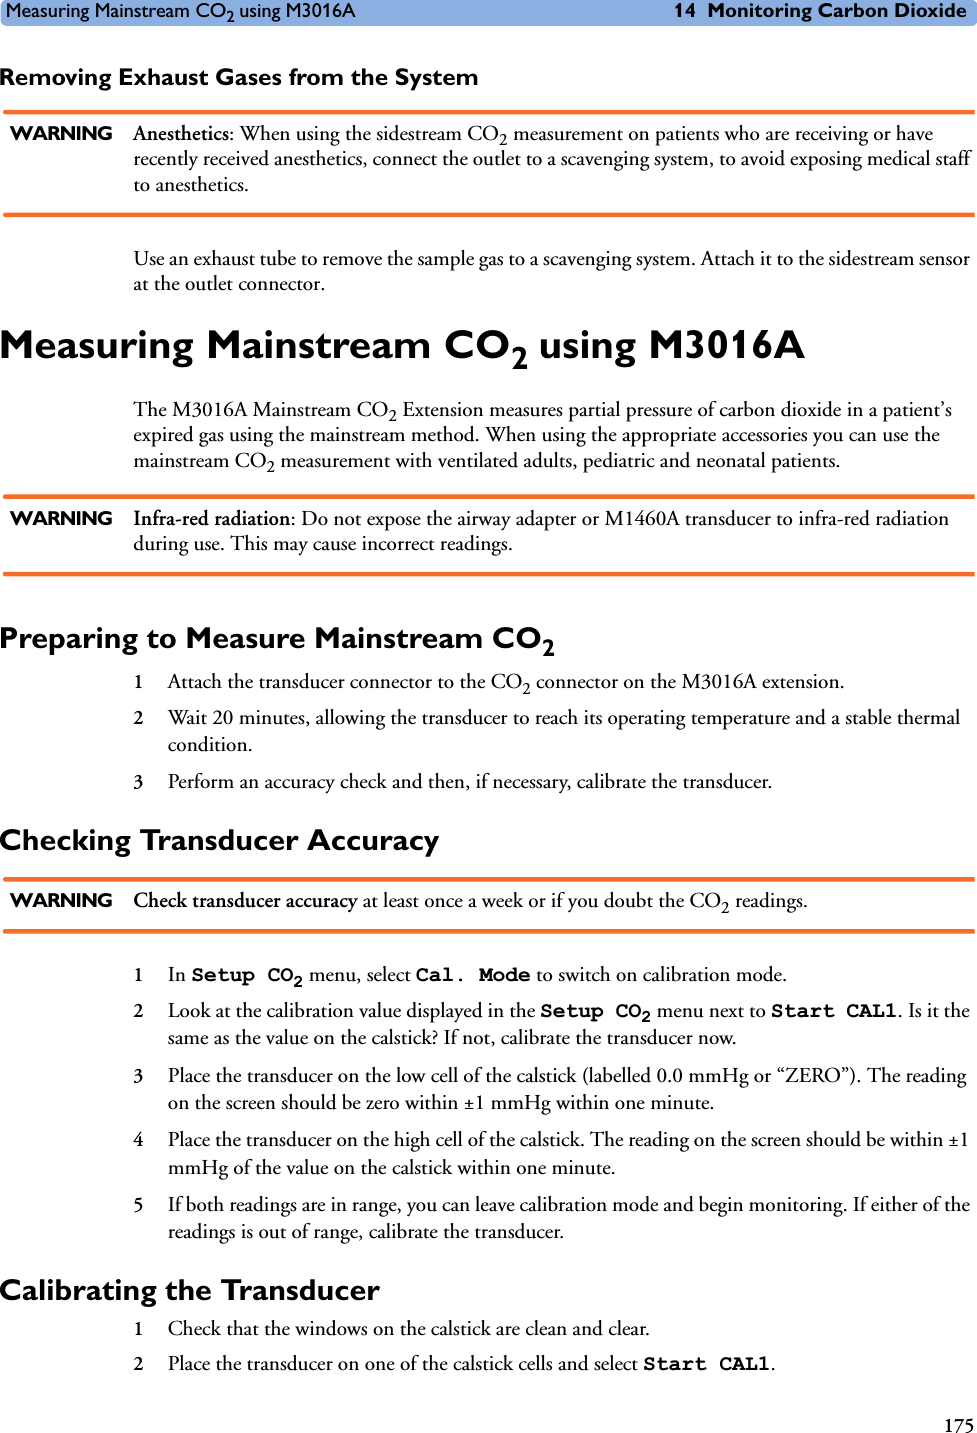 Measuring Mainstream CO2 using M3016A 14 Monitoring Carbon Dioxide175Removing Exhaust Gases from the SystemWARNING Anesthetics: When using the sidestream CO2 measurement on patients who are receiving or have recently received anesthetics, connect the outlet to a scavenging system, to avoid exposing medical staff to anesthetics.Use an exhaust tube to remove the sample gas to a scavenging system. Attach it to the sidestream sensor at the outlet connector.Measuring Mainstream CO2 using M3016AThe M3016A Mainstream CO2 Extension measures partial pressure of carbon dioxide in a patient’s expired gas using the mainstream method. When using the appropriate accessories you can use the mainstream CO2 measurement with ventilated adults, pediatric and neonatal patients.WARNING Infra-red radiation: Do not expose the airway adapter or M1460A transducer to infra-red radiation during use. This may cause incorrect readings.Preparing to Measure Mainstream CO21Attach the transducer connector to the CO2 connector on the M3016A extension.2Wait 20 minutes, allowing the transducer to reach its operating temperature and a stable thermal condition.3Perform an accuracy check and then, if necessary, calibrate the transducer.Checking Transducer AccuracyWARNING Check transducer accuracy at least once a week or if you doubt the CO2 readings.1In Setup CO2 menu, select Cal. Mode to switch on calibration mode.2Look at the calibration value displayed in the Setup CO2 menu next to Start CAL1. Is it the same as the value on the calstick? If not, calibrate the transducer now.3Place the transducer on the low cell of the calstick (labelled 0.0 mmHg or “ZERO”). The reading on the screen should be zero within ±1 mmHg within one minute.4Place the transducer on the high cell of the calstick. The reading on the screen should be within ±1 mmHg of the value on the calstick within one minute.5If both readings are in range, you can leave calibration mode and begin monitoring. If either of the readings is out of range, calibrate the transducer.Calibrating the Transducer1Check that the windows on the calstick are clean and clear.2Place the transducer on one of the calstick cells and select Start CAL1.